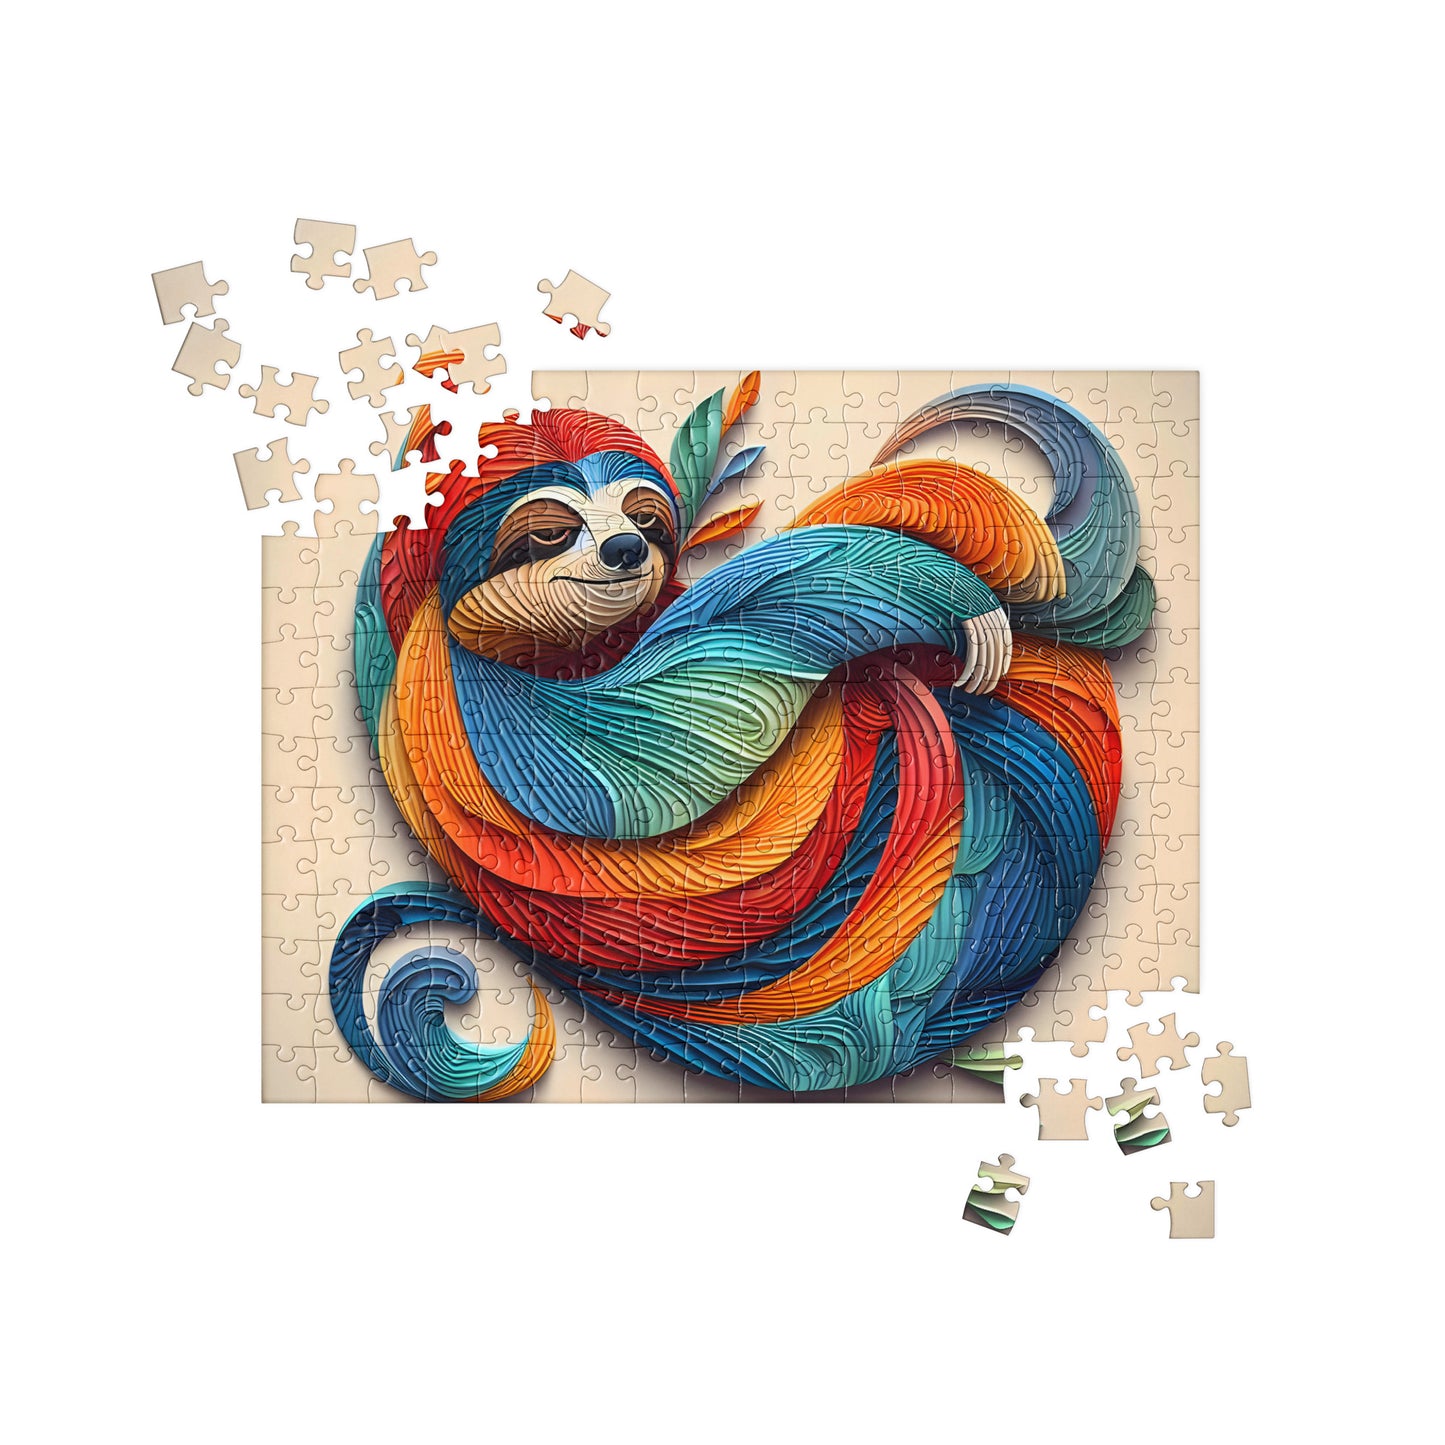 Beautiful 3D Animals and Birds - Jigsaw Puzzle #3